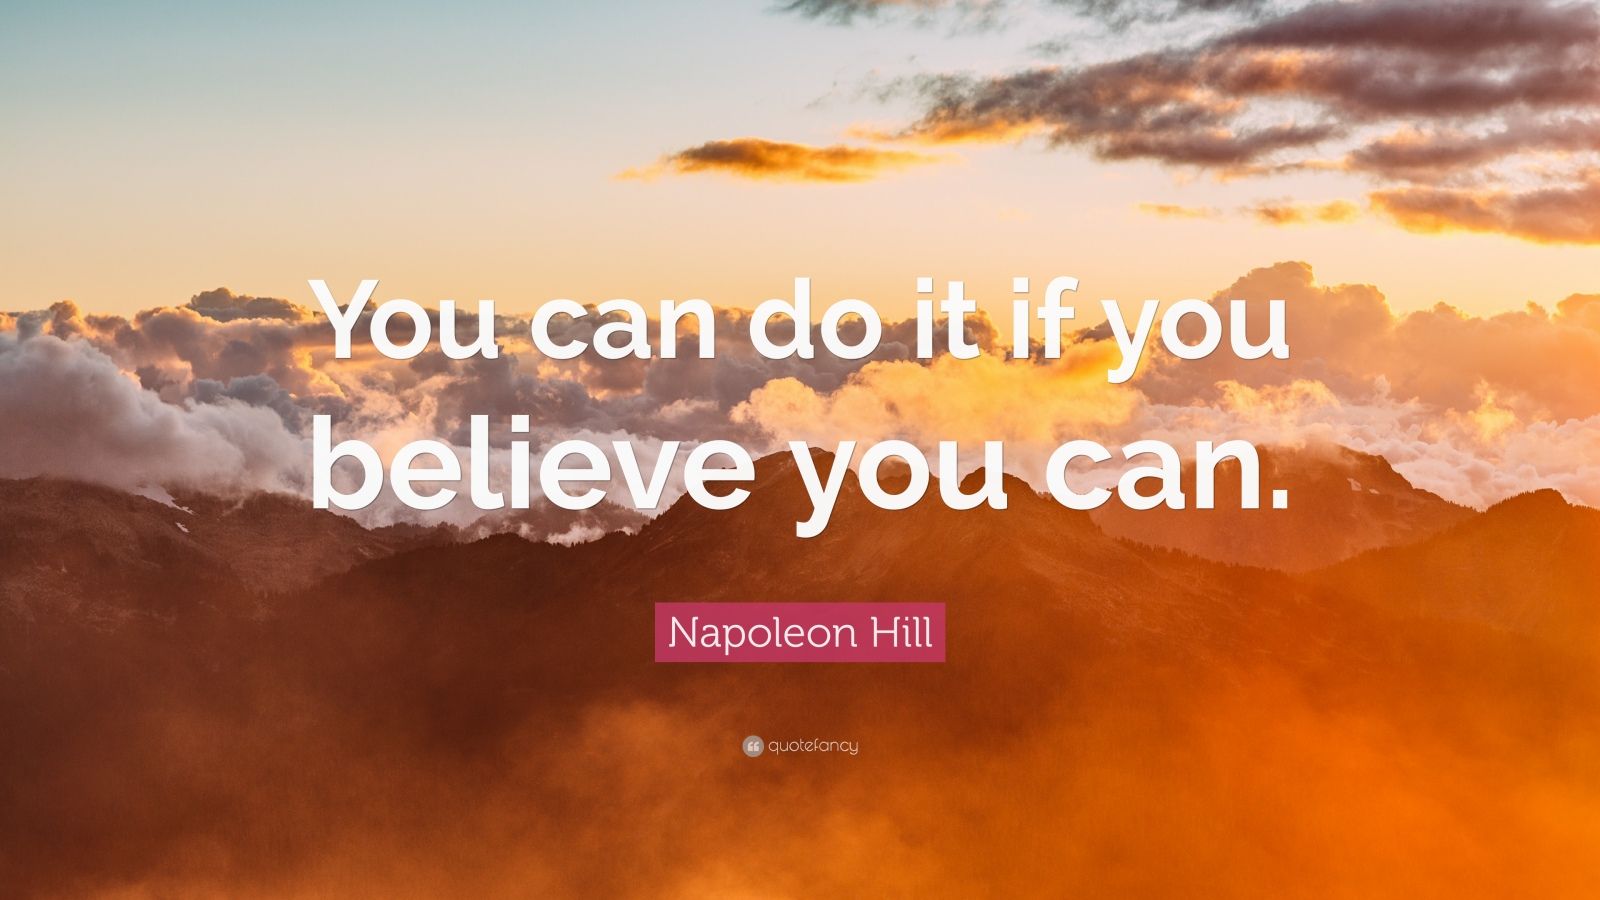 106196-Napoleon-Hill-Quote-You-can-do-it-if-you-believe-you-can.jpg